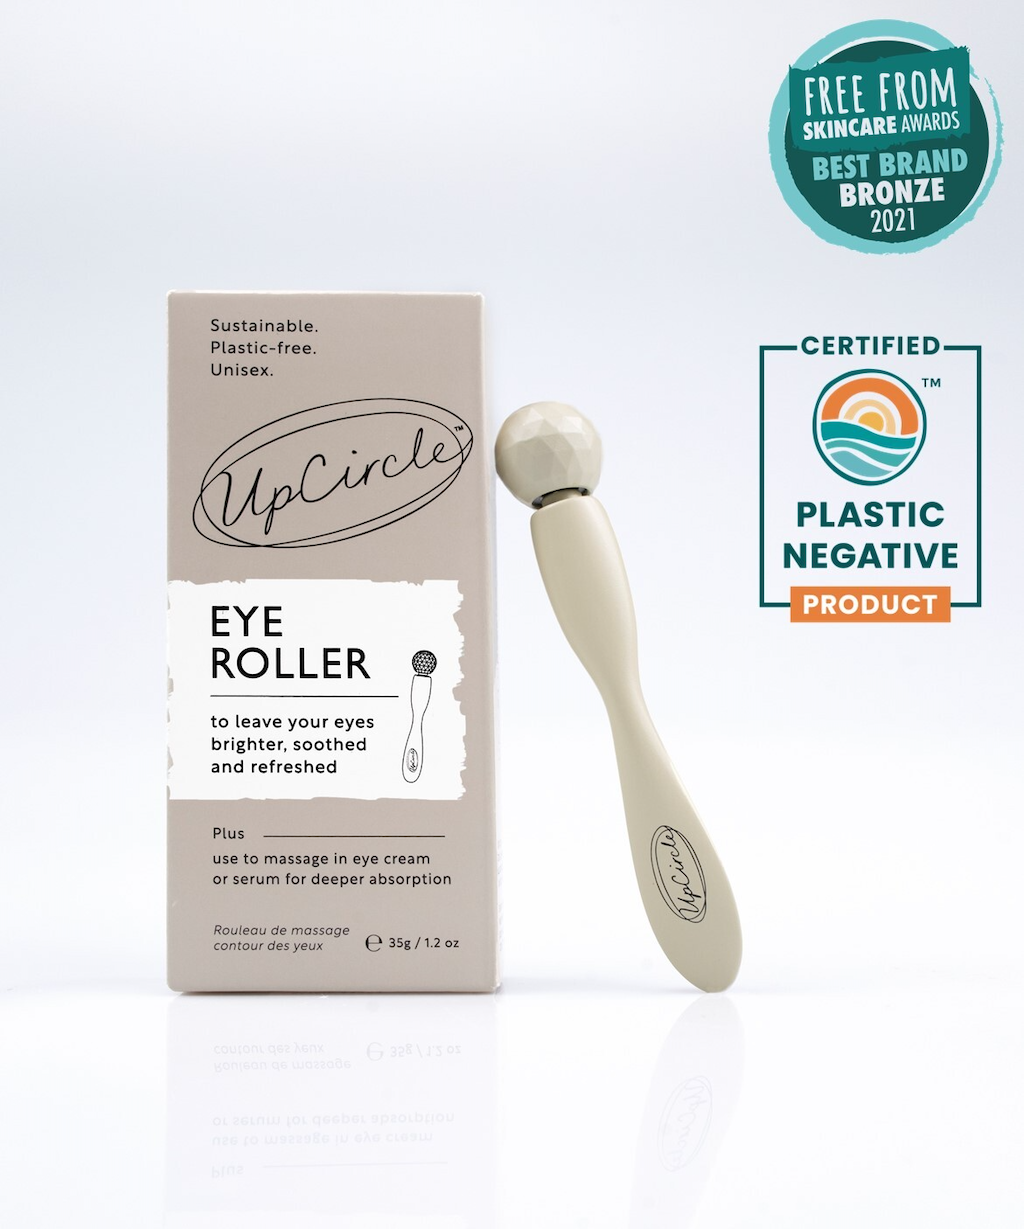 bestselling and award winning eye roller tool  from upcircle beauty. a certified plastic negative 